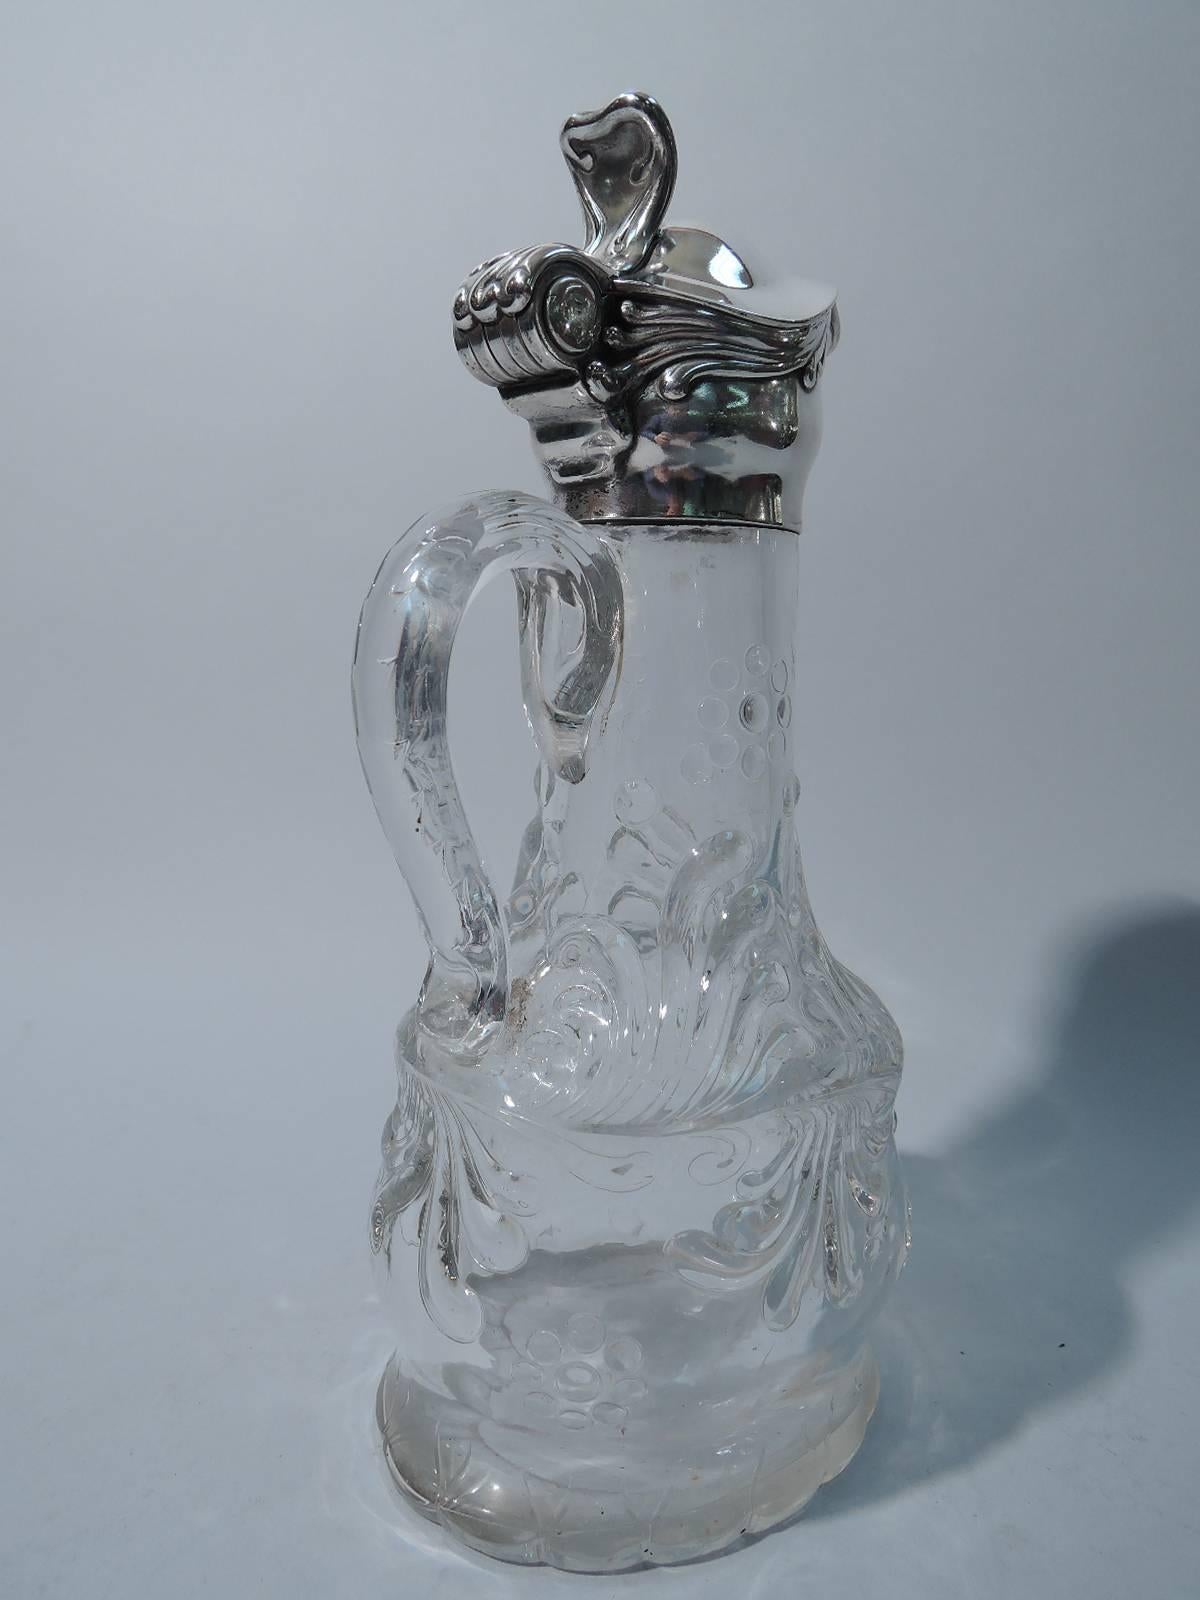 Art Nouveau sterling silver and crystal decanter. Made by Tiffany & Co. Bombe and ovoid with cylindrical neck and scroll handle with foliate cap. Low relief foliage and dot clusters (possibly abstract grape bunches). Silver collar and hinged cover